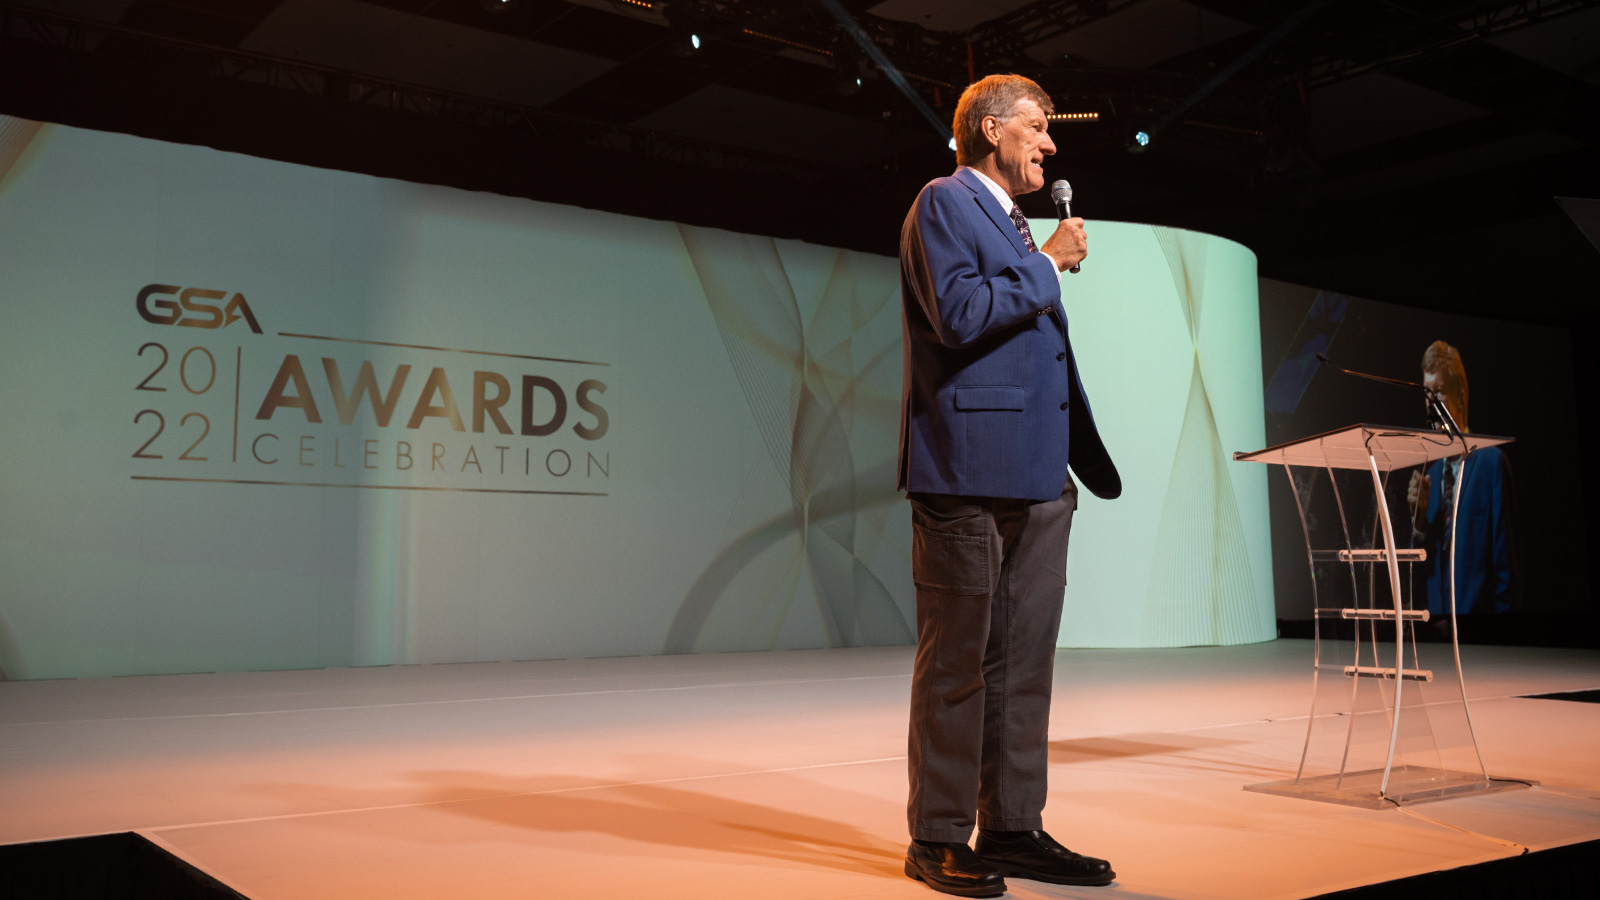 an image of a presenter on stage with the Awards Dinner styled background screen